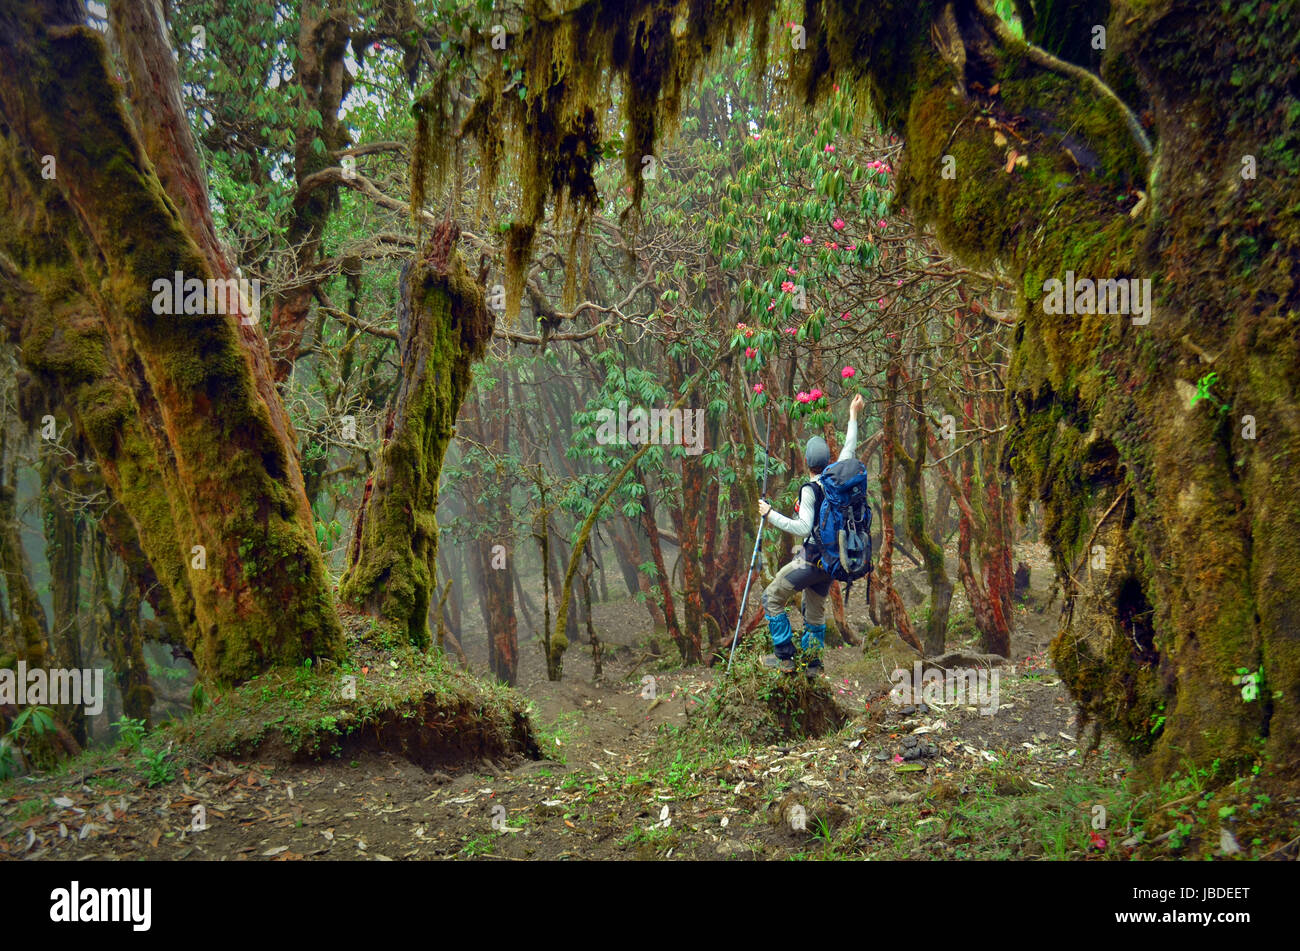 Tracker (man) tearing a rhododendron flower in tropical forest. Stock Photo